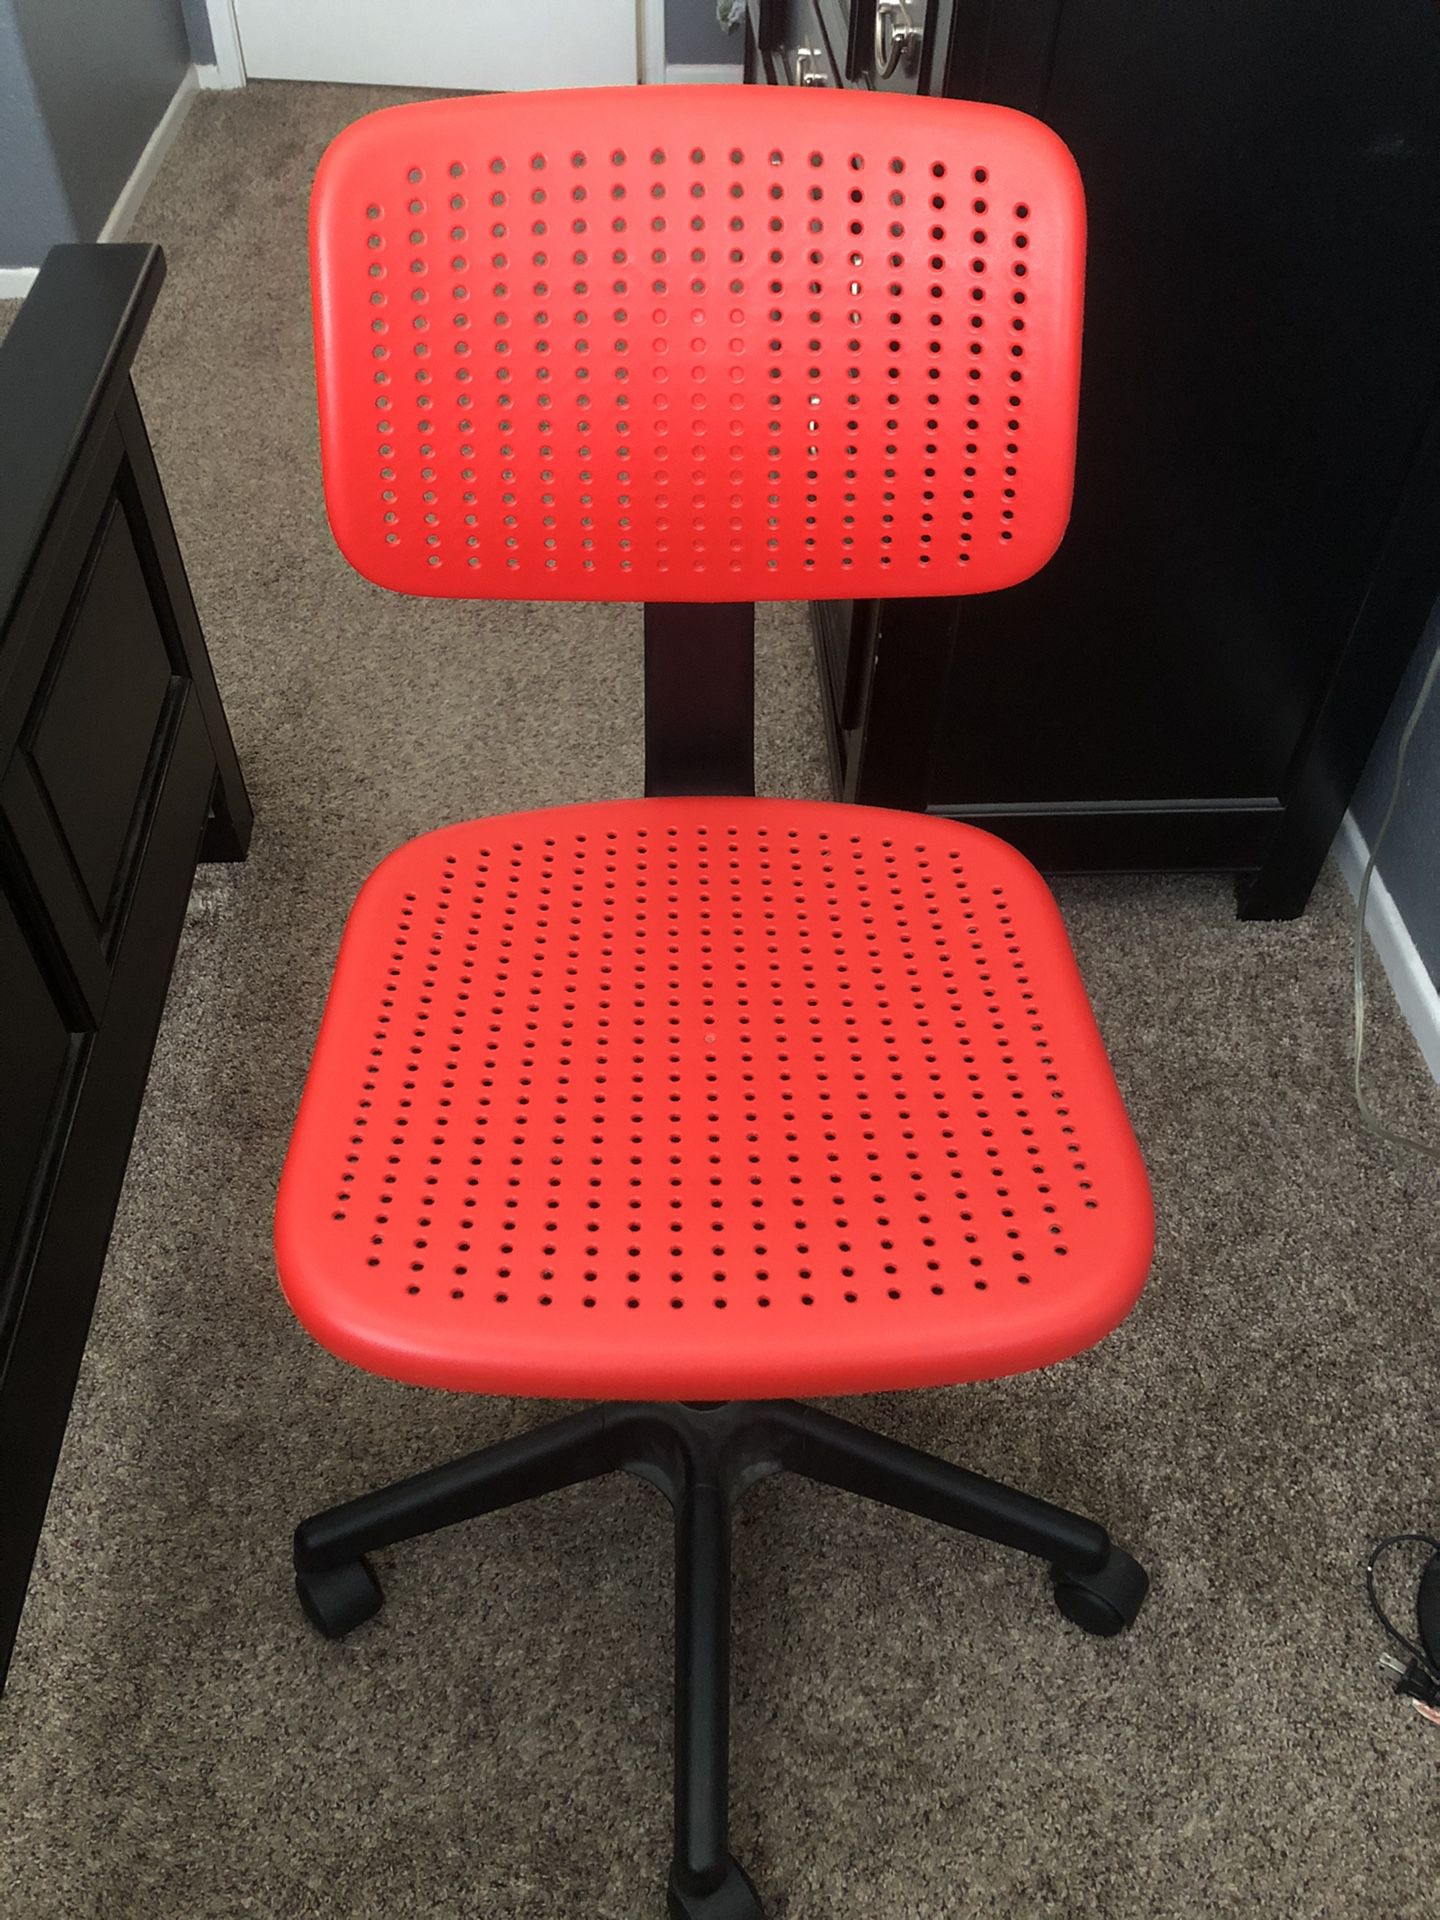 Red Office Chair